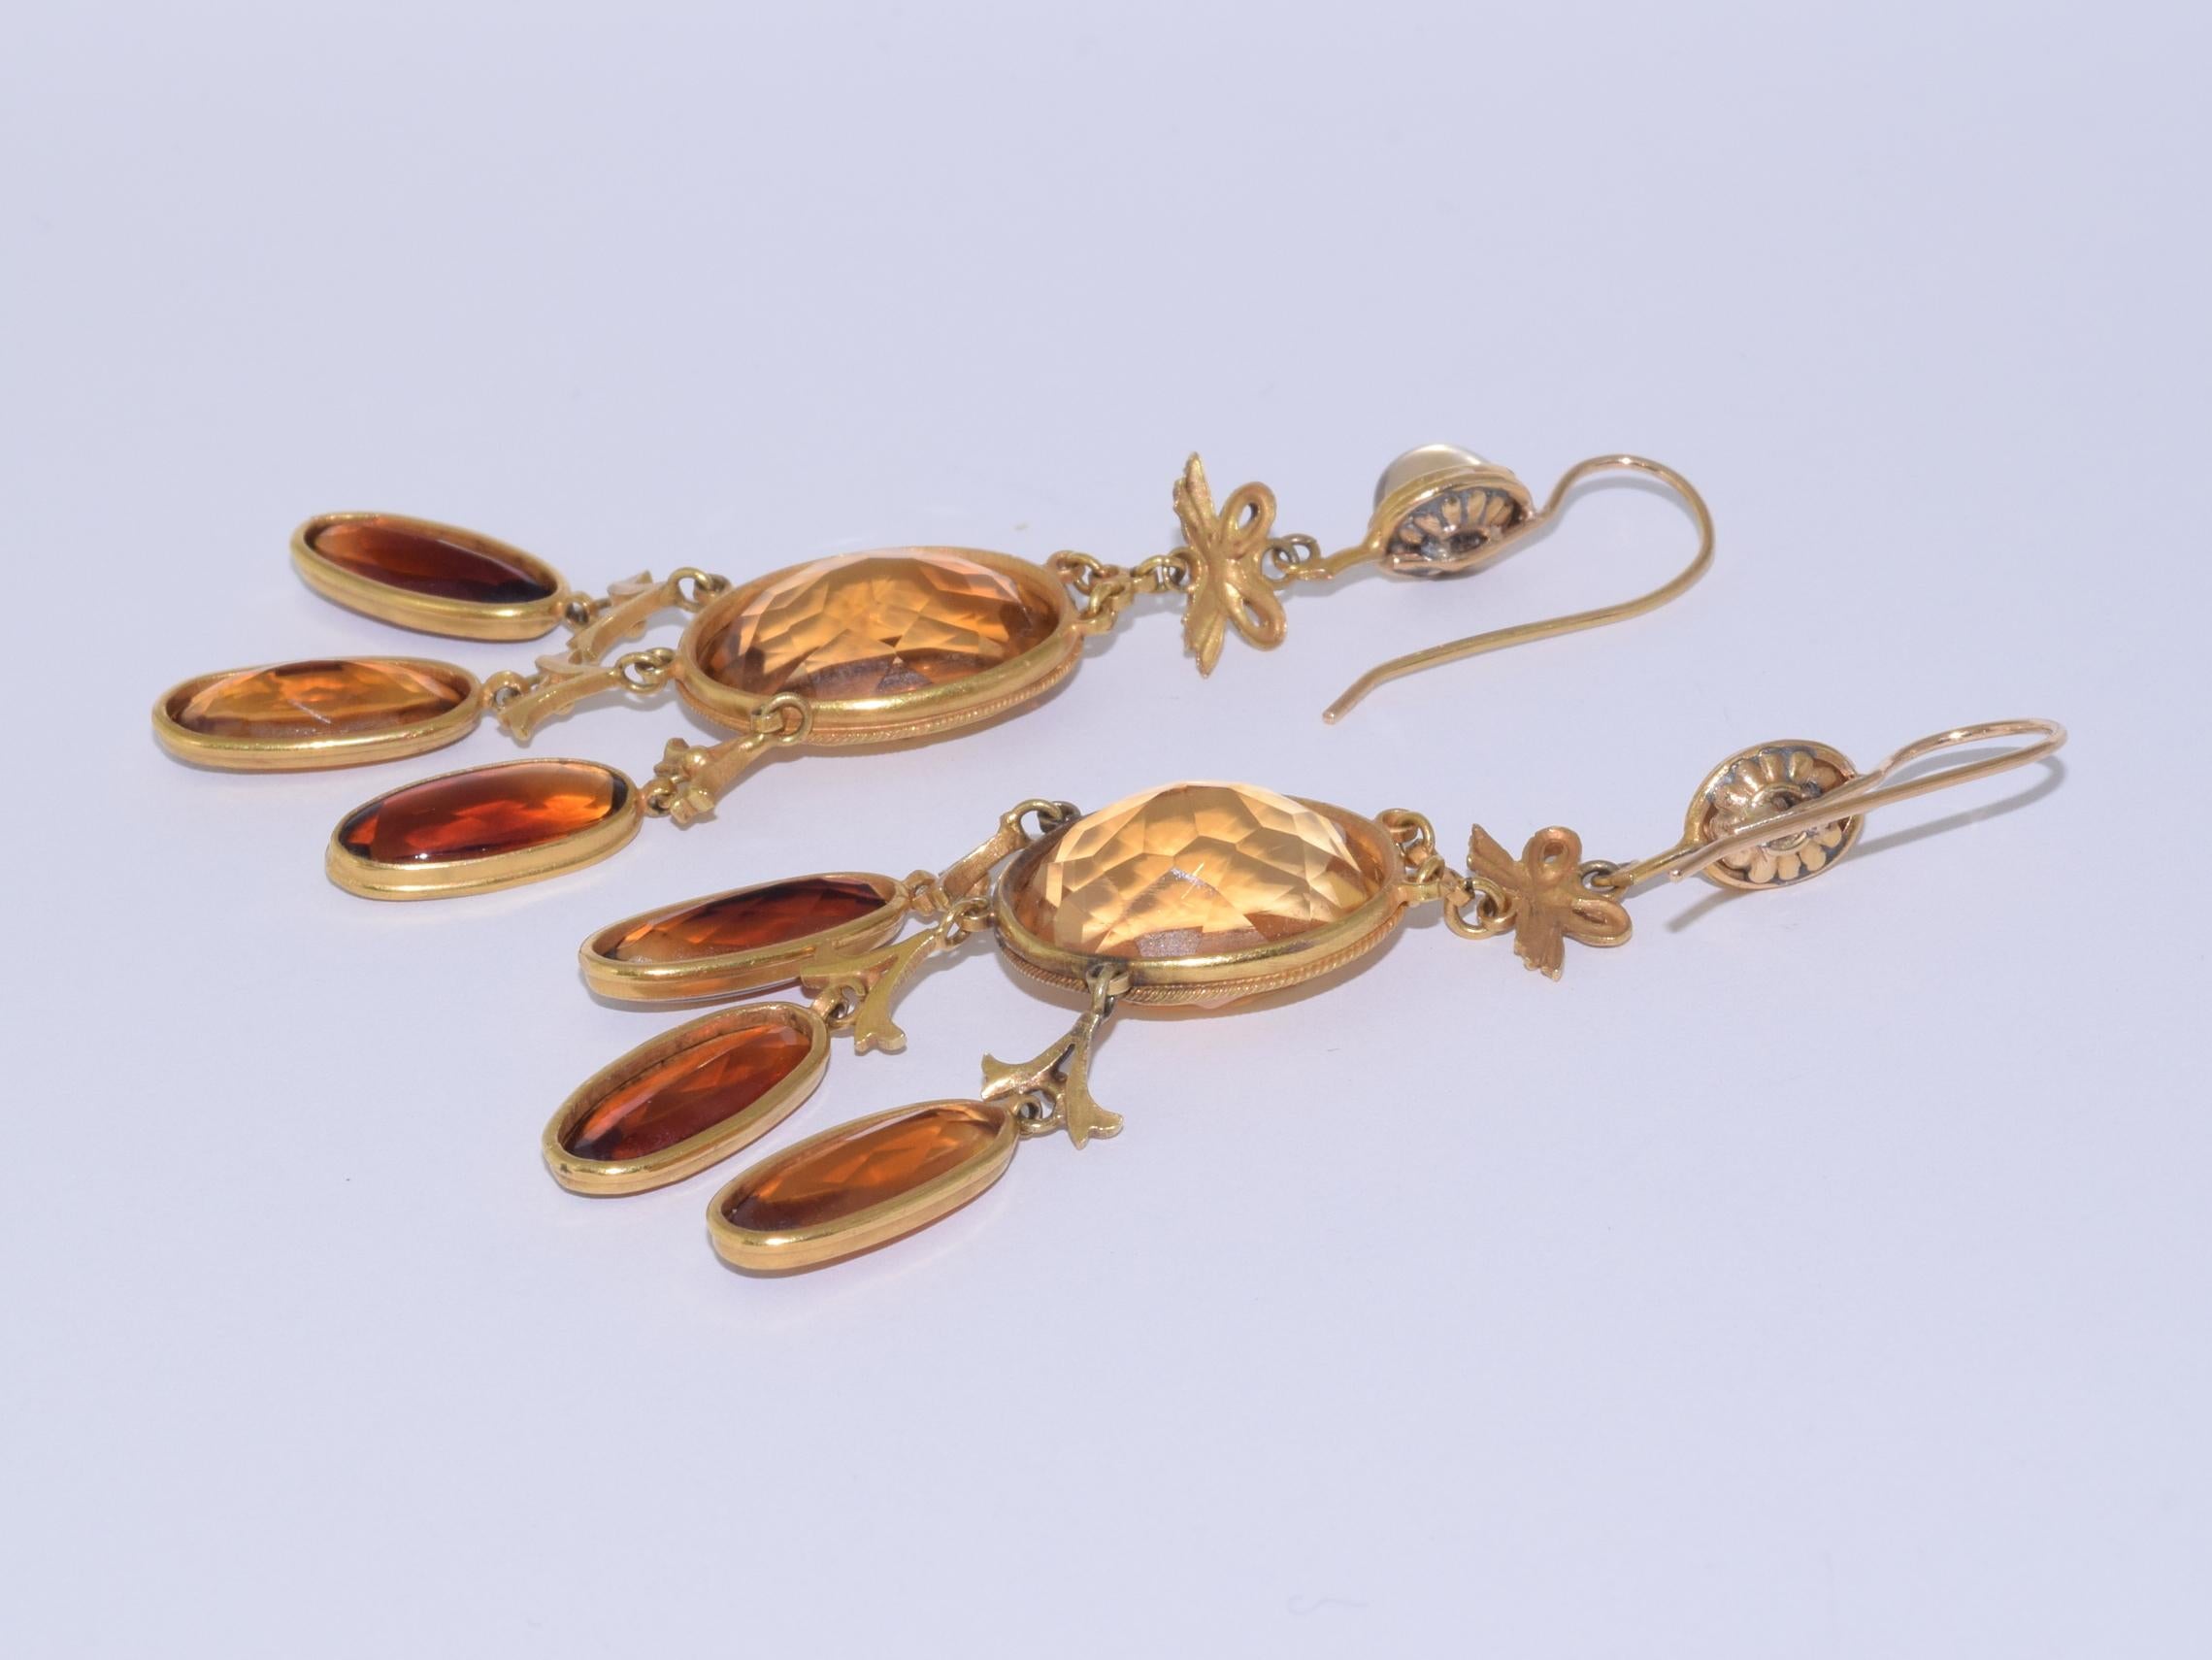 Oval citrines totaling approximately 17.50 carats are suspended with a fringe of bufftop oval citrines totaling approximately 10.50 carats in 18 karat yellow gold mountings with bow motifs.

Length: 3 inches.
Width: 1-7/16 inches.